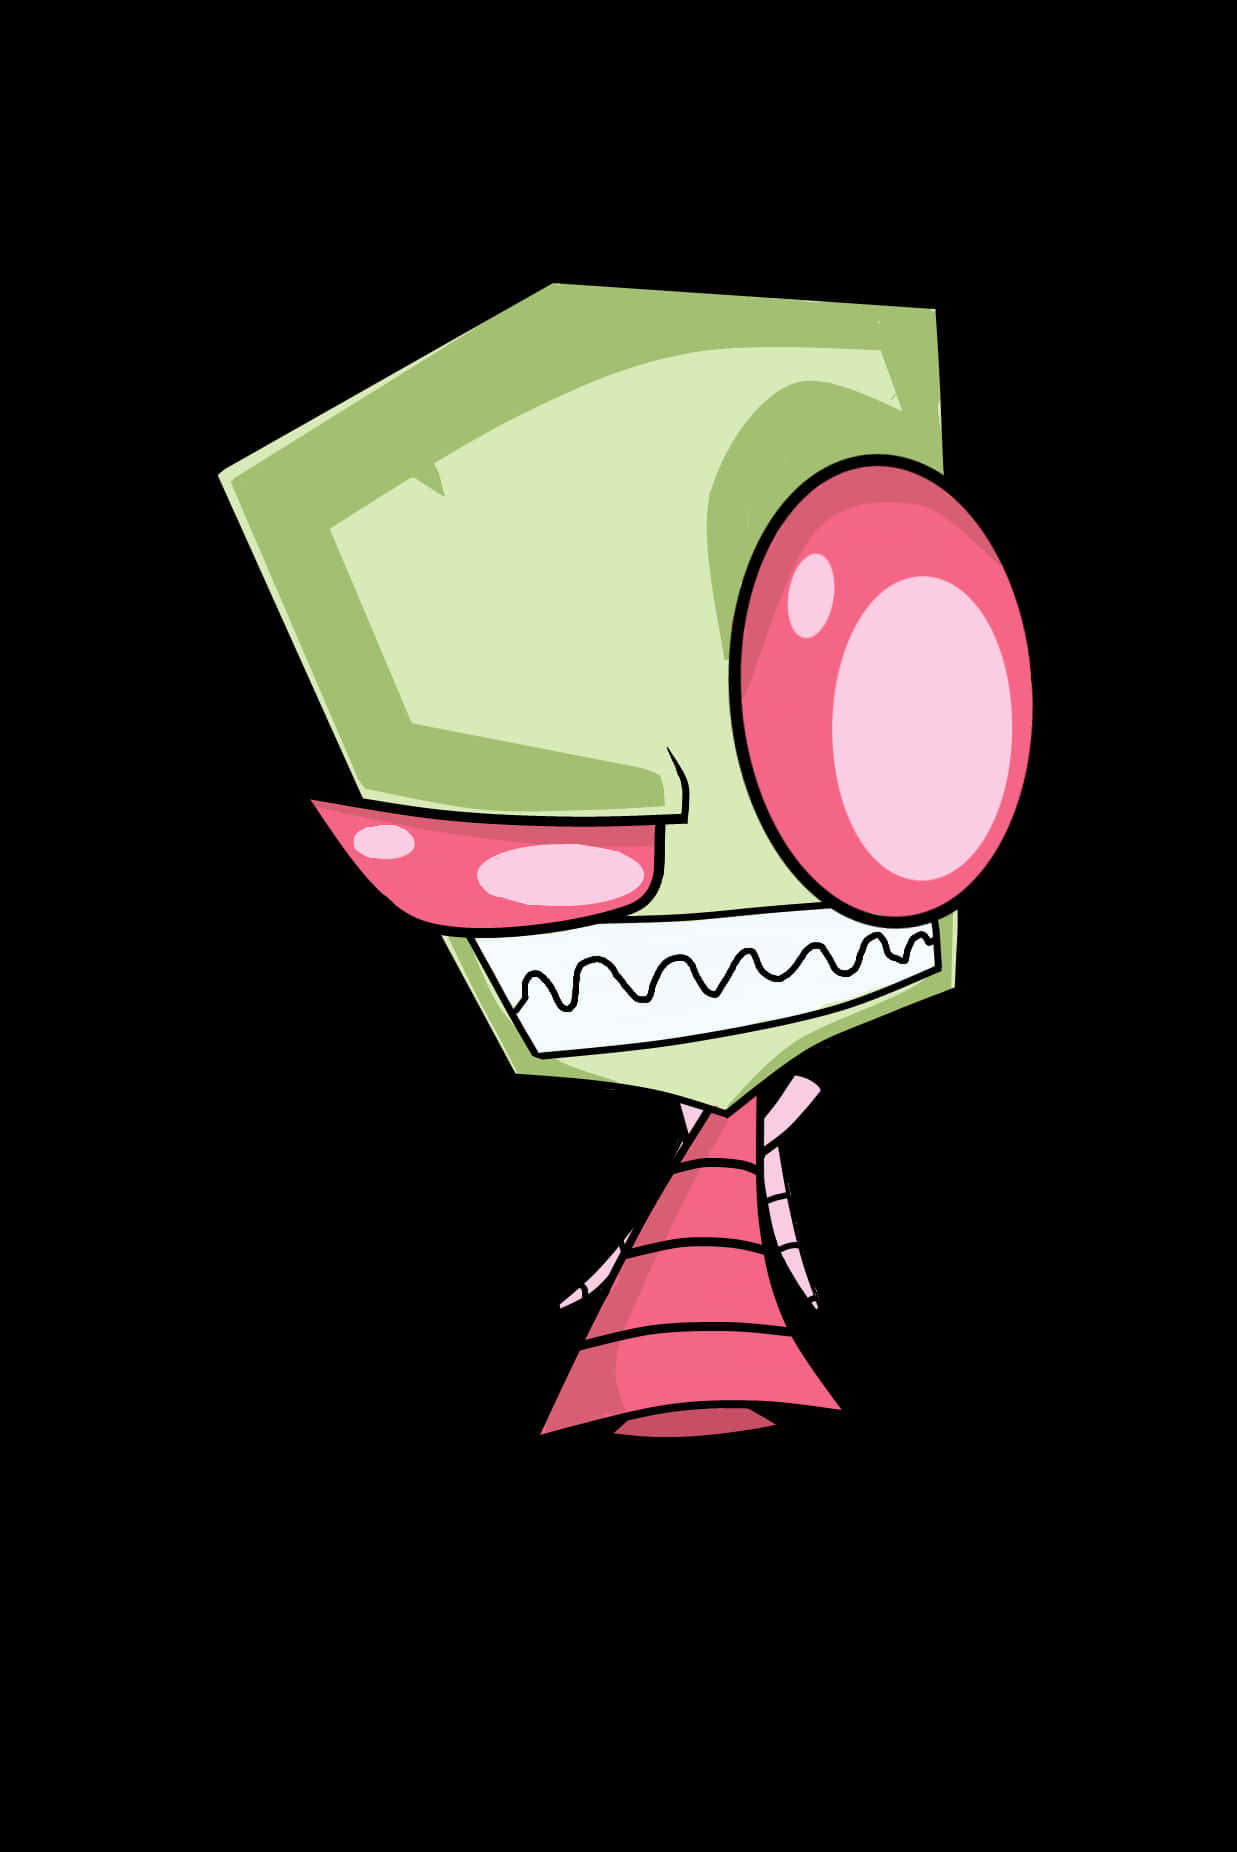 Join Invader Zim on a Journey of Mischief